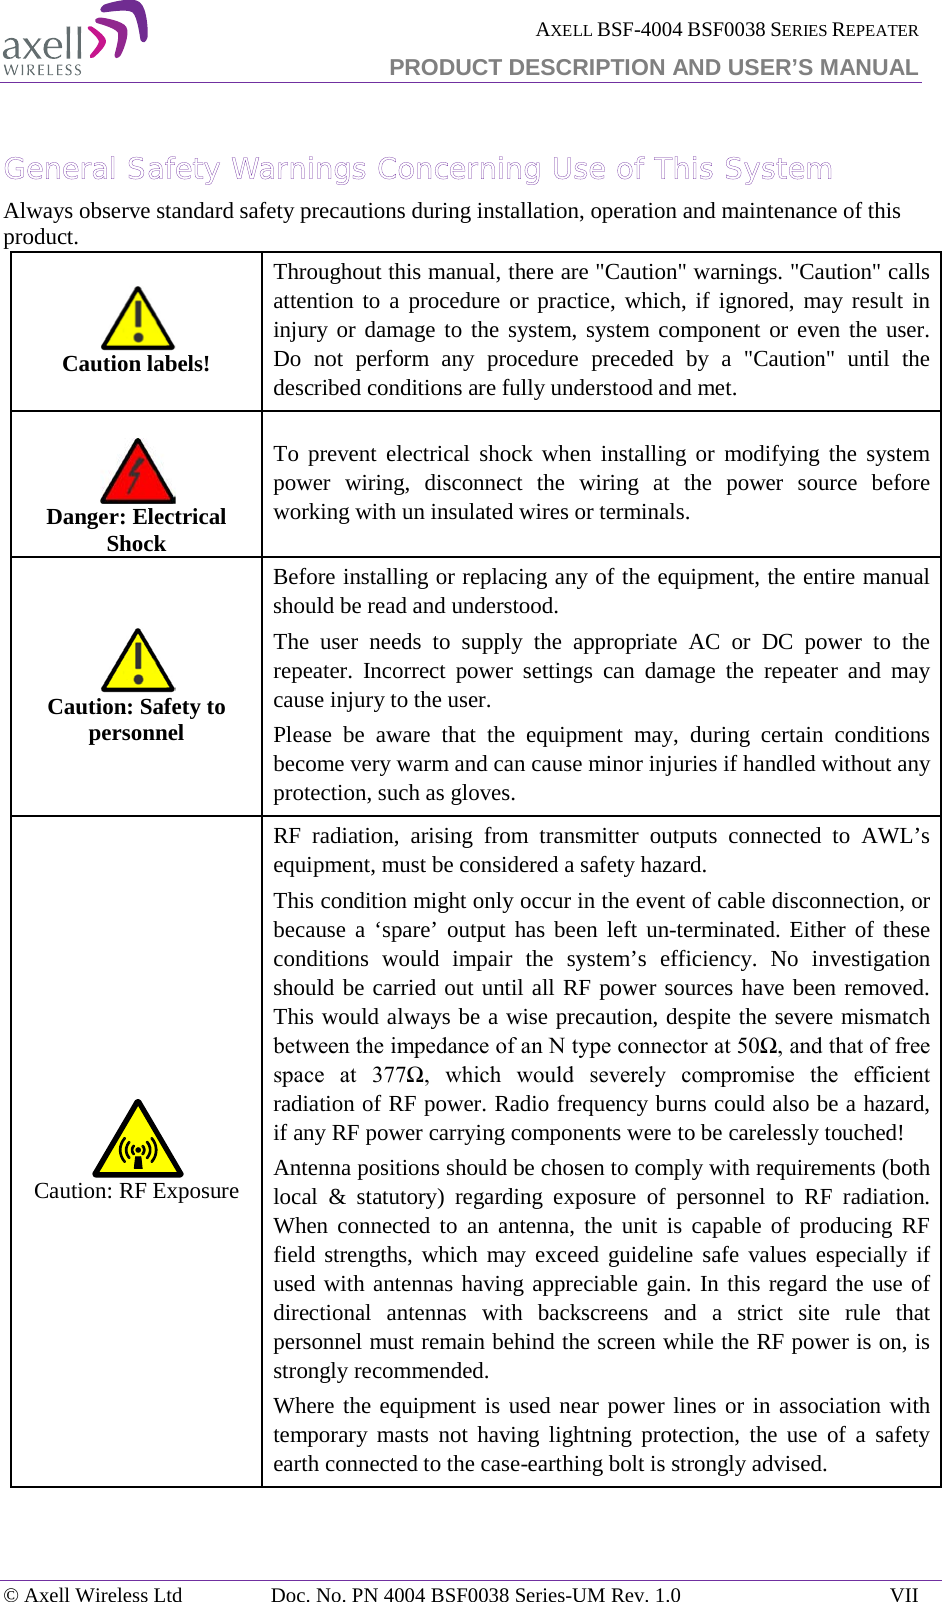  AXELL BSF-4004 BSF0038 SERIES REPEATER PRODUCT DESCRIPTION AND USER’S MANUAL  General Safety Warnings Concerning Use of This System Always observe standard safety precautions during installation, operation and maintenance of this product.  Caution labels! Throughout this manual, there are &quot;Caution&quot; warnings. &quot;Caution&quot; calls attention to a procedure or practice, which, if ignored, may result in injury or damage to the system, system component or even the user. Do not perform any procedure preceded by a &quot;Caution&quot; until the described conditions are fully understood and met.    Danger: Electrical Shock To prevent electrical shock when installing or modifying the system power wiring, disconnect the wiring at the power source before working with un insulated wires or terminals.  Caution: Safety to personnel Before installing or replacing any of the equipment, the entire manual should be read and understood. The user needs to supply the appropriate AC or DC power to the repeater. Incorrect power settings can damage the repeater and may cause injury to the user. Please be aware that the equipment may, during certain conditions become very warm and can cause minor injuries if handled without any protection, such as gloves.  Caution: RF Exposure RF radiation, arising from transmitter outputs connected to AWL’s equipment, must be considered a safety hazard. This condition might only occur in the event of cable disconnection, or because a ‘spare’ output has been left un-terminated. Either of these conditions would impair the system’s efficiency. No investigation should be carried out until all RF power sources have been removed. This would always be a wise precaution, despite the severe mismatch between the impedance of an N type connector at 50Ω, and that of free space  at  377Ω,  which  would  severely  compromise  the  efficient radiation of RF power. Radio frequency burns could also be a hazard, if any RF power carrying components were to be carelessly touched! Antenna positions should be chosen to comply with requirements (both local &amp; statutory) regarding exposure of personnel to RF radiation. When connected to an antenna, the unit is capable of producing RF field strengths, which may exceed guideline safe values especially if used with antennas having appreciable gain. In this regard the use of directional antennas with backscreens and a strict site rule that personnel must remain behind the screen while the RF power is on, is strongly recommended. Where the equipment is used near power lines or in association with temporary masts not having lightning protection, the use of a safety earth connected to the case-earthing bolt is strongly advised.    © Axell Wireless Ltd Doc. No. PN 4004 BSF0038 Series-UM Rev. 1.0 VII 